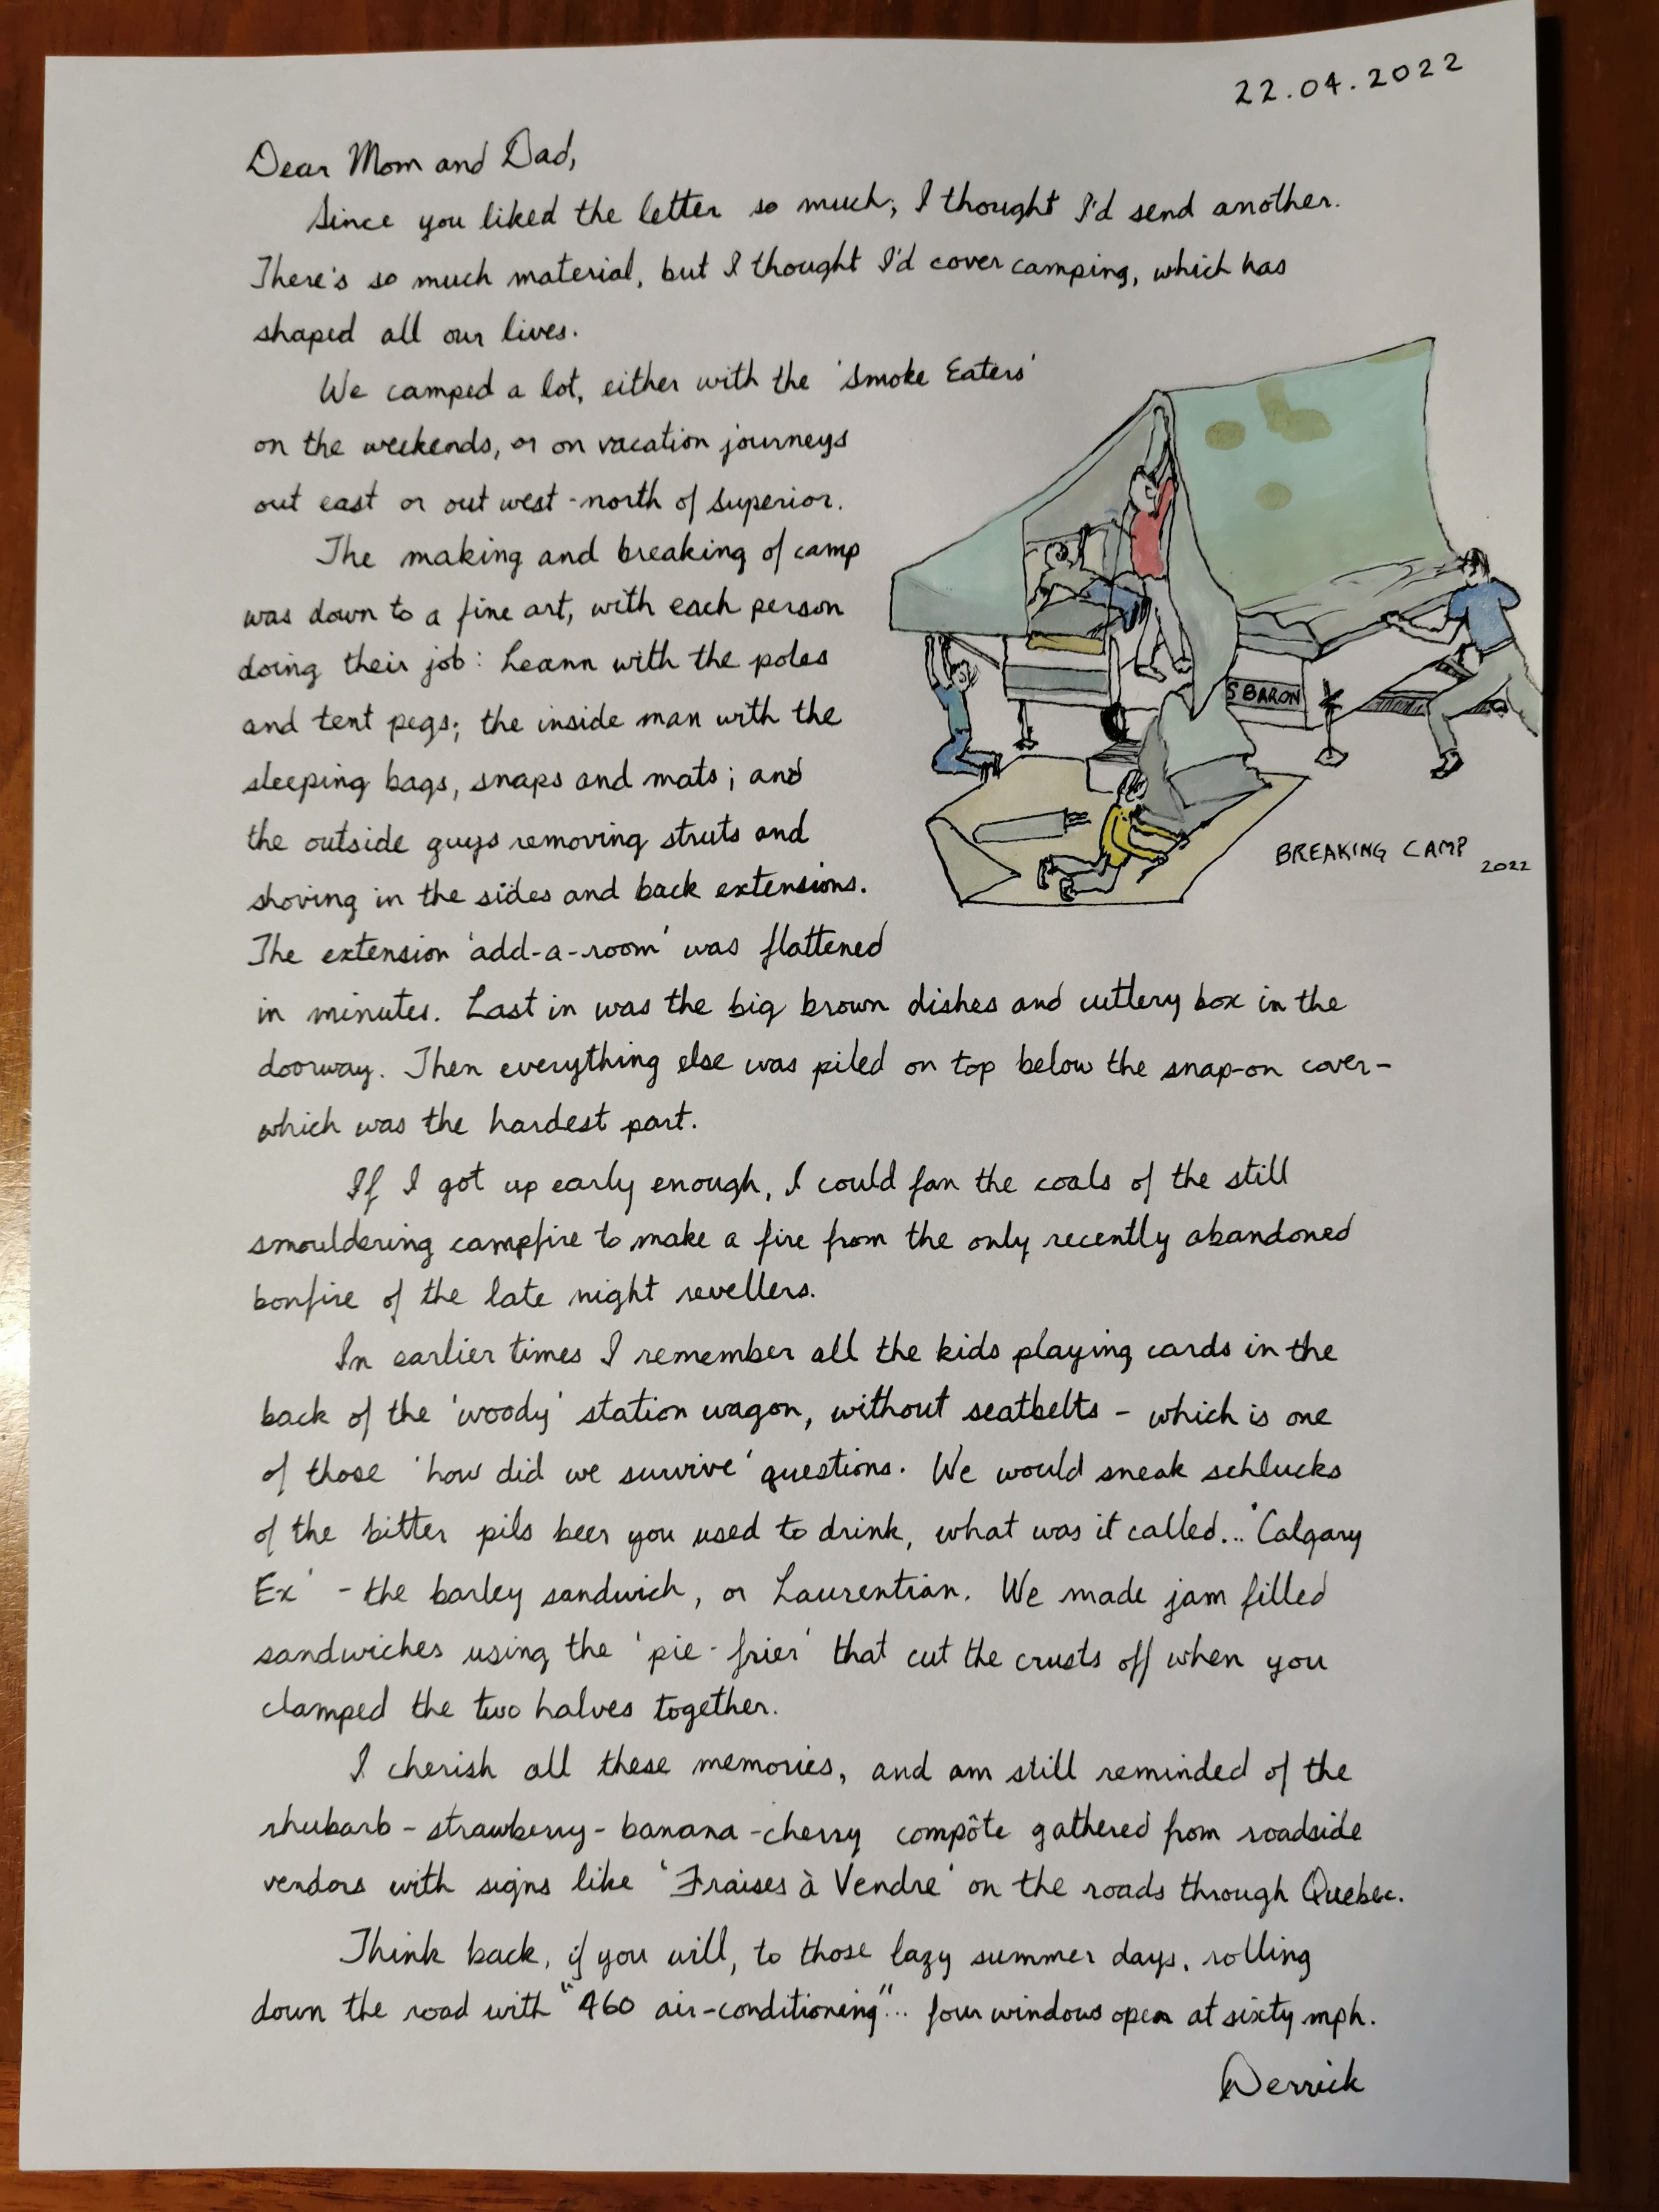 cursive letter about camping